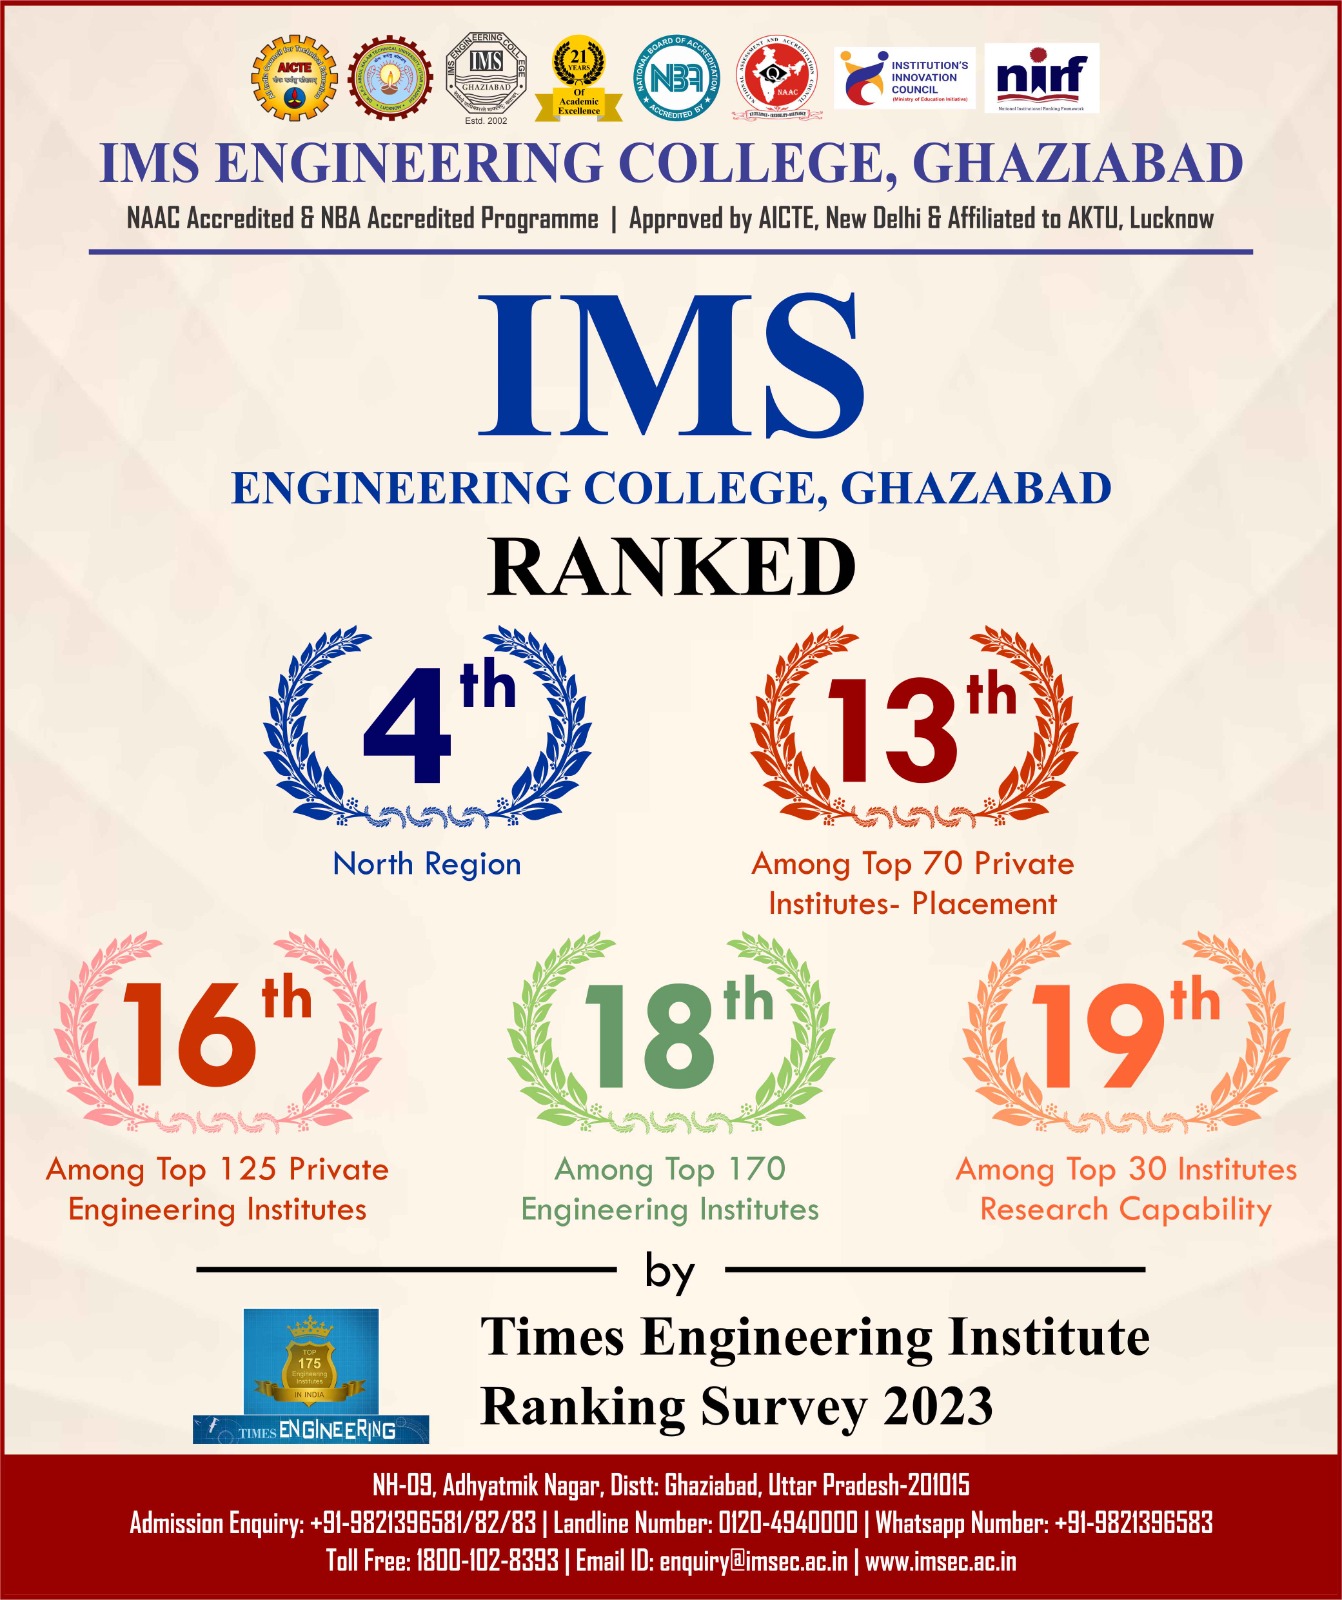 Times All India Engineering Institutes Ranking Survey 2023